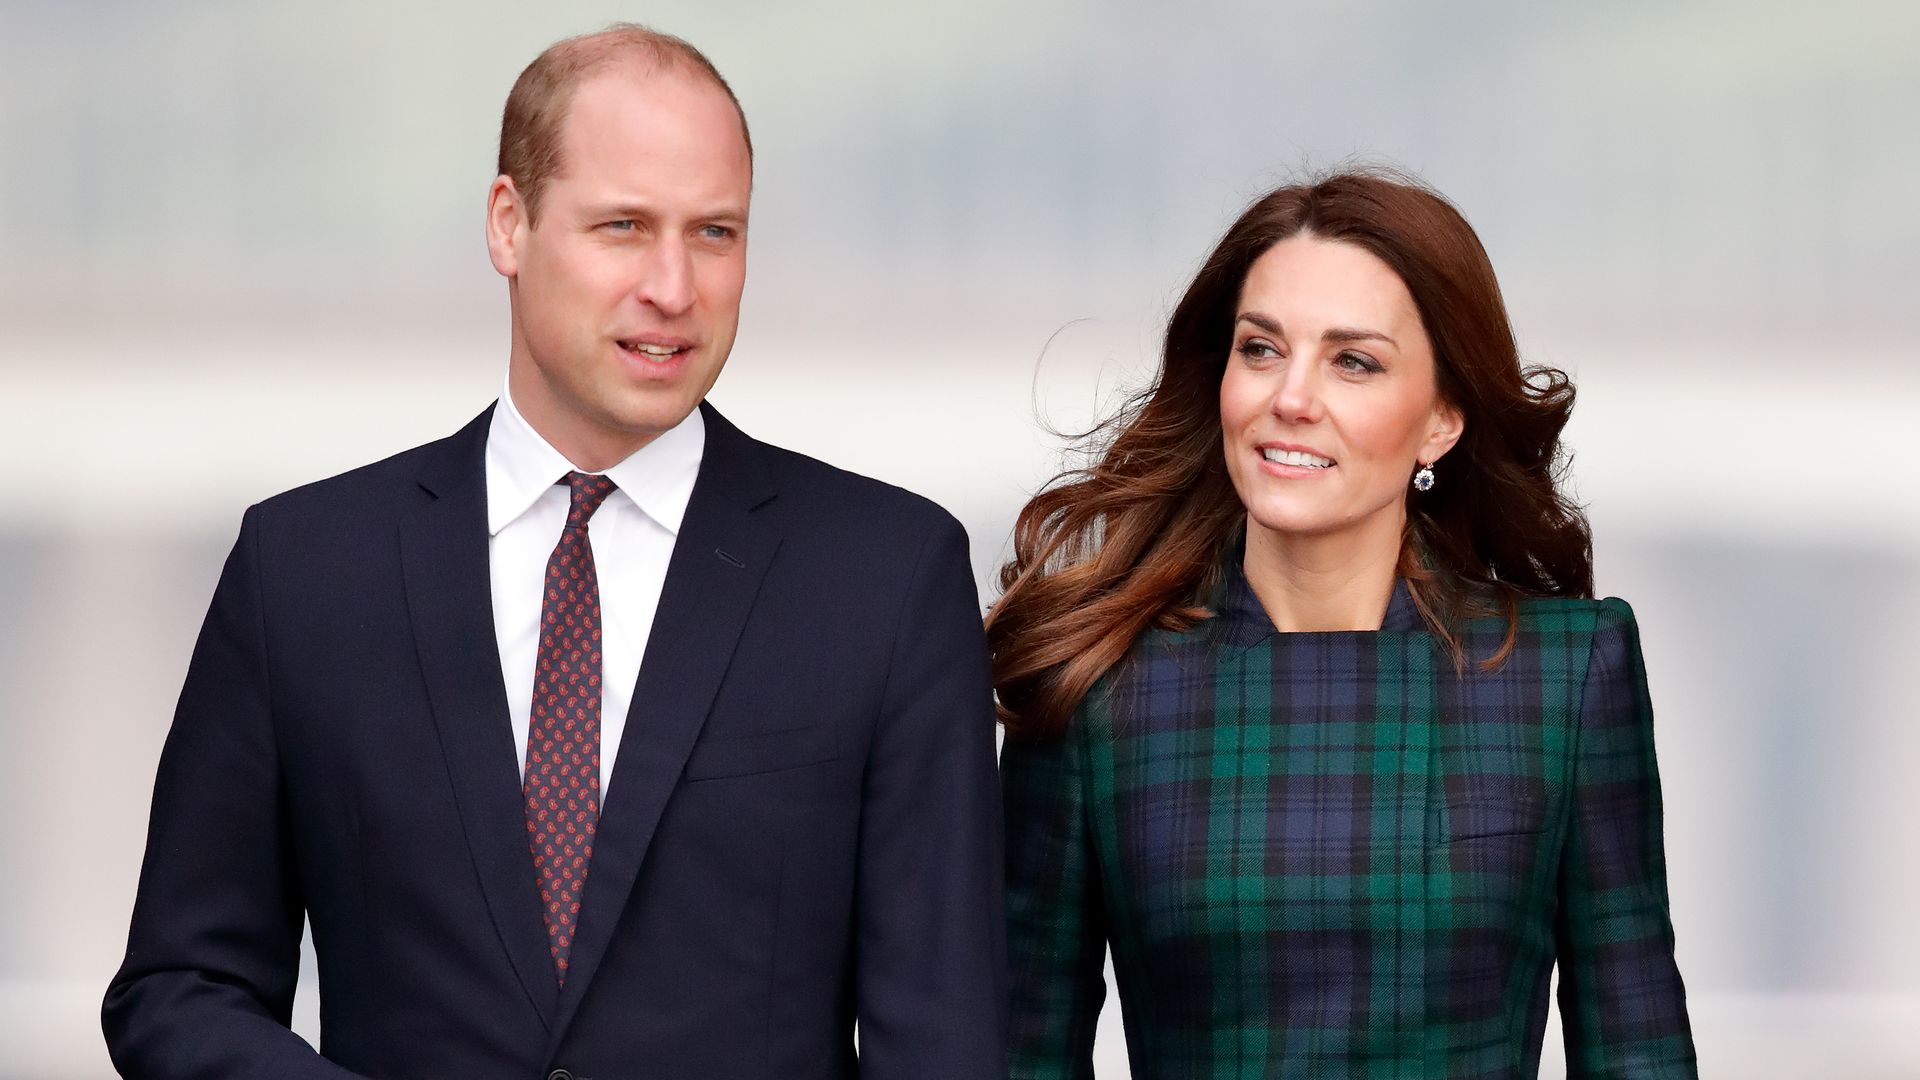 The Duke And Duchess Of Cambridge Visit Dundee 2019